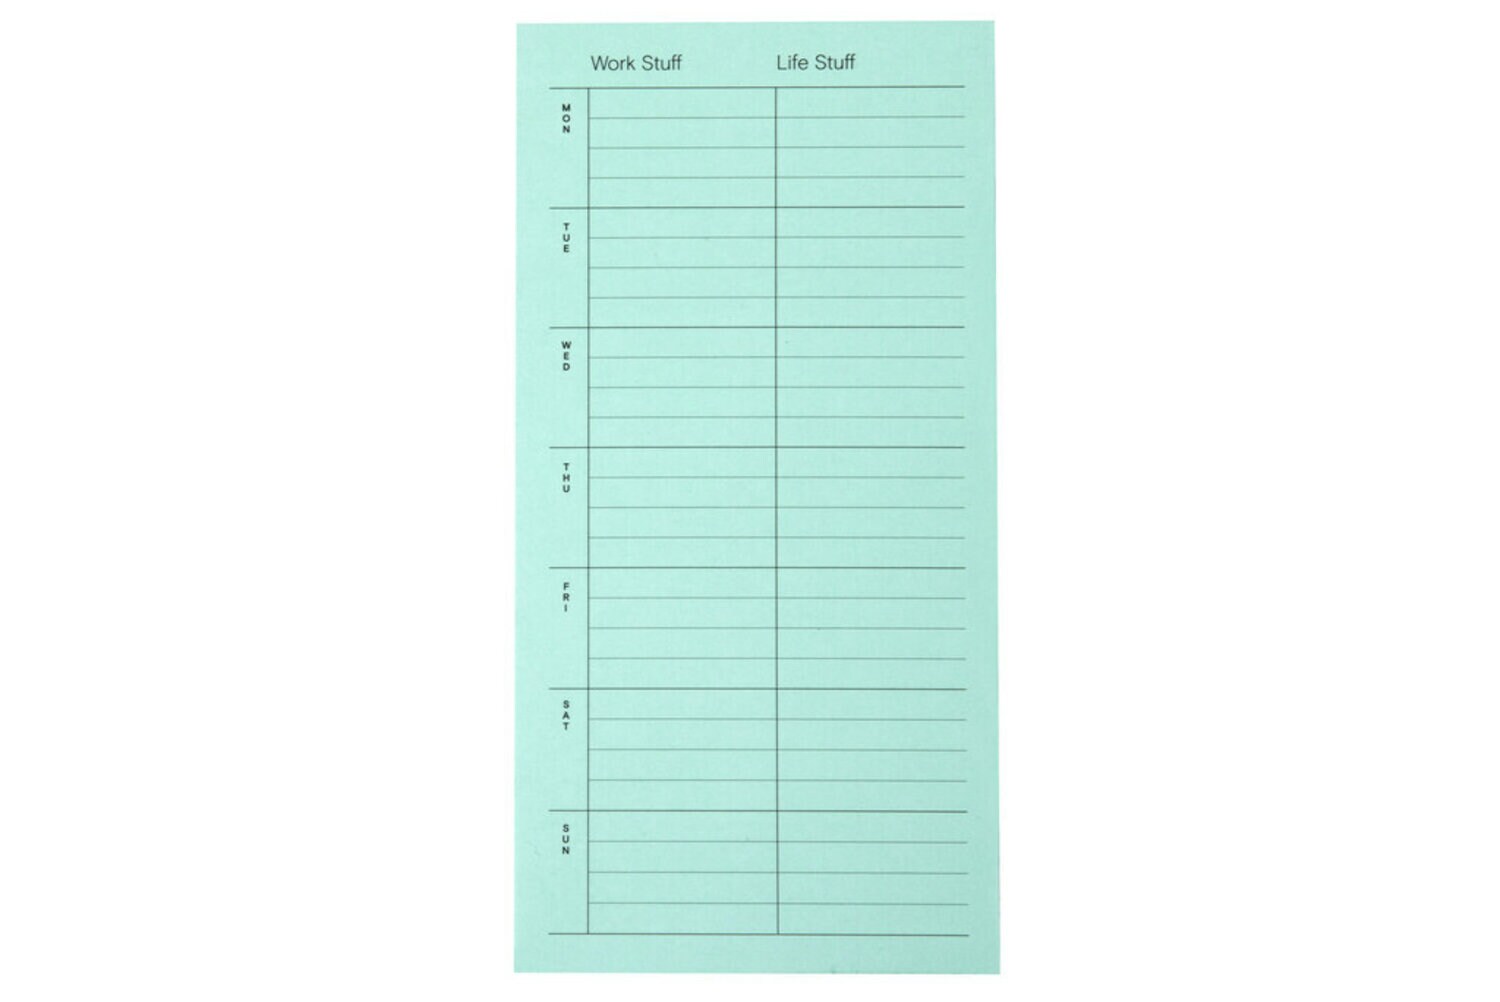 7100288716 - Post-it Planning Notes NTD7-48-1, 3.9 in x 7.7 in (99 mm x 195 mm)